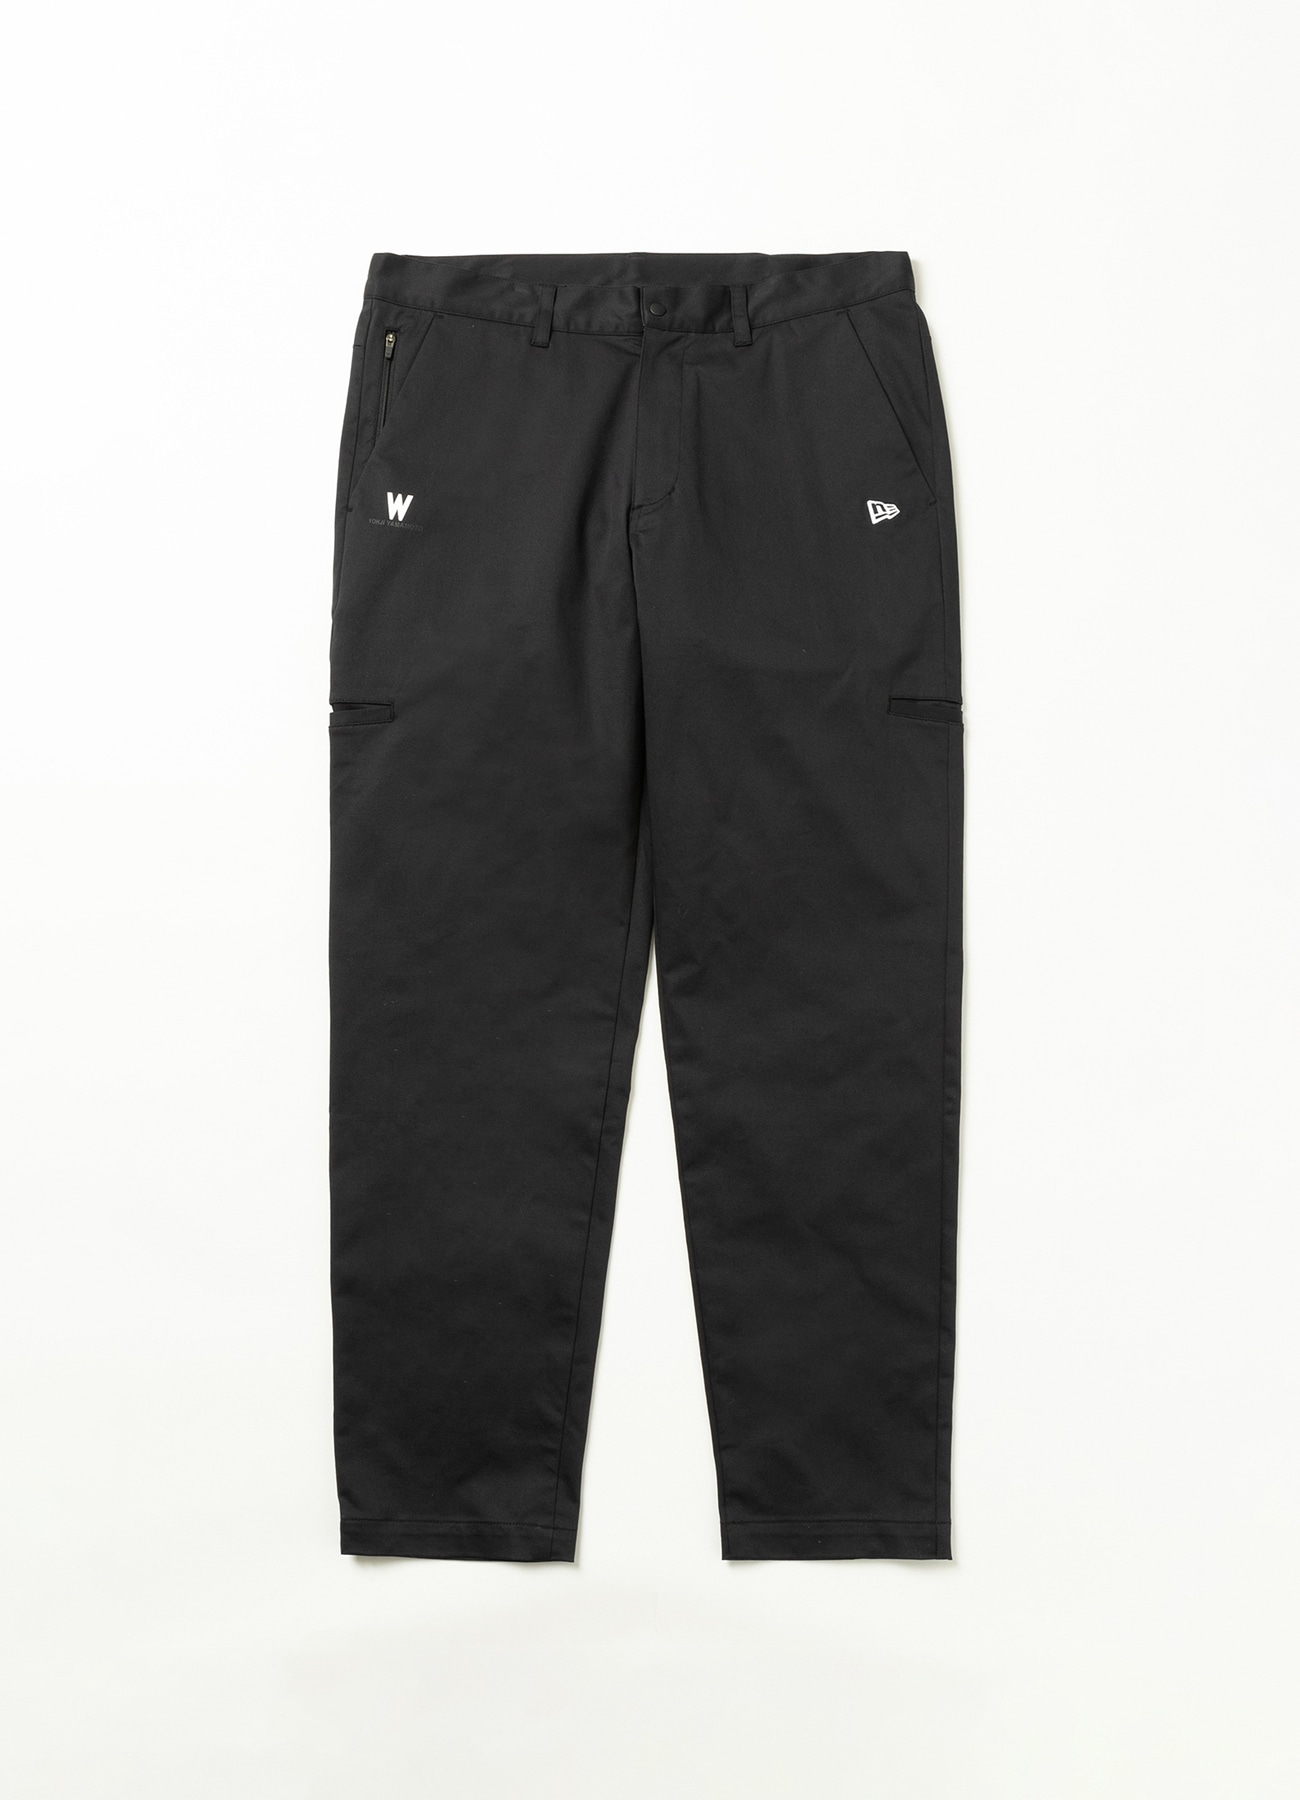 WILDSIDE × NEW ERA Tapered Stretch Pants